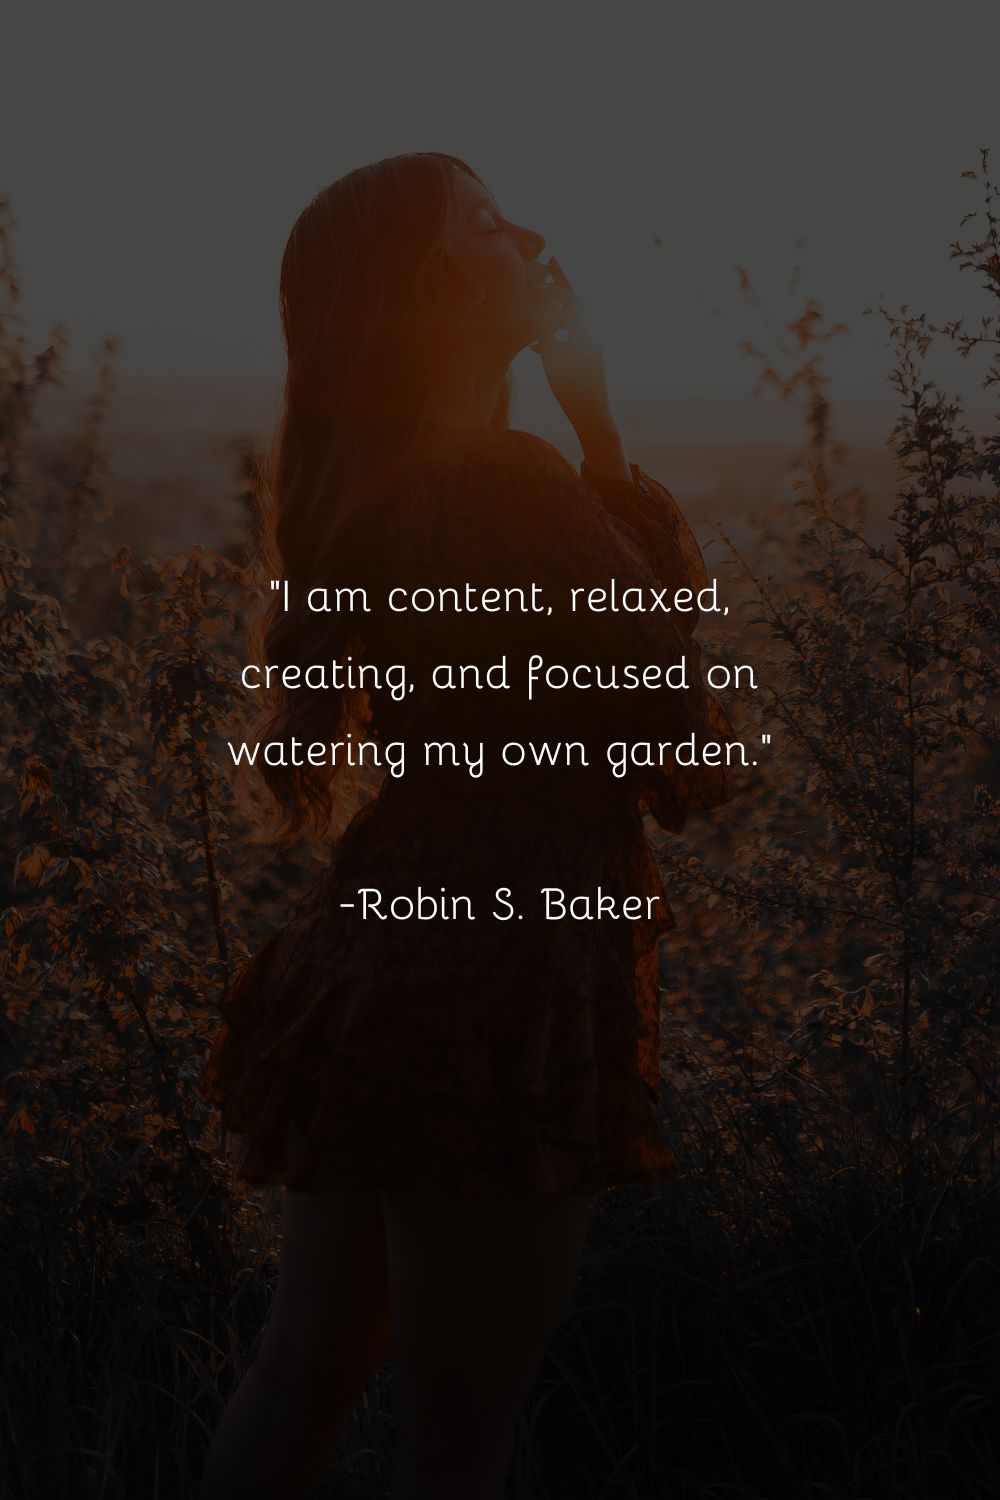 I am content, relaxed, creating, and focused on watering my own garden